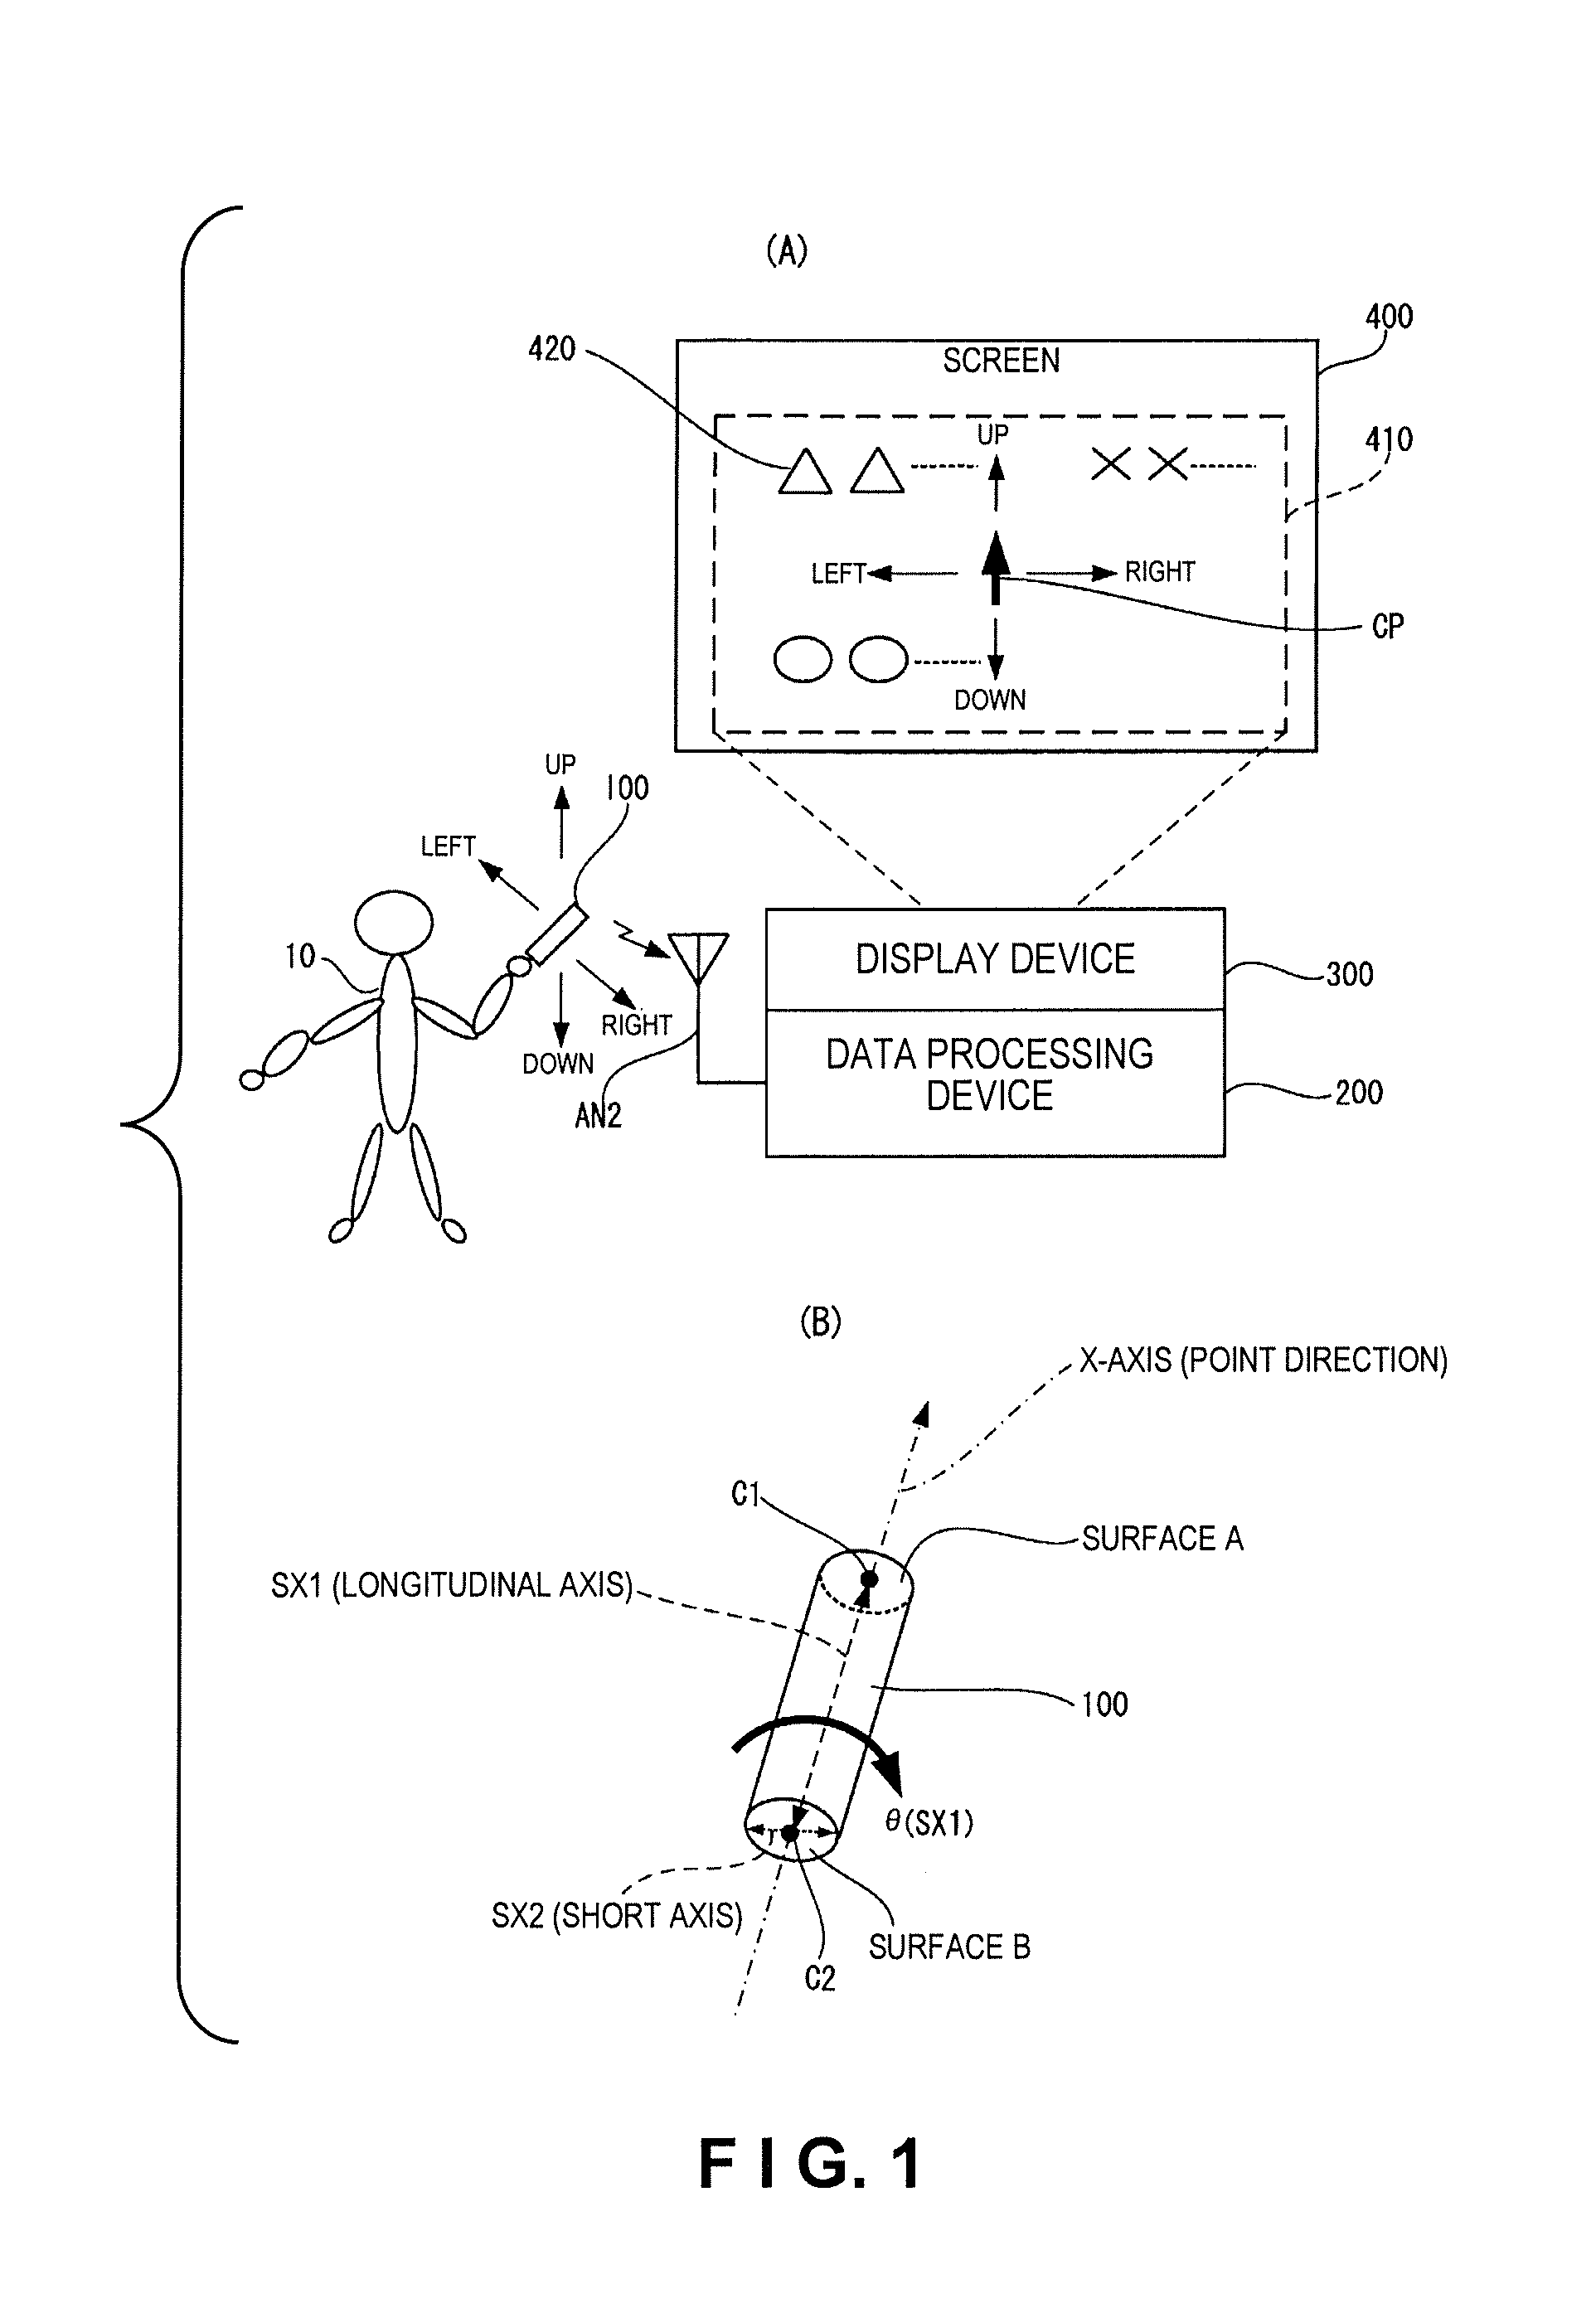 Input device and data processing system